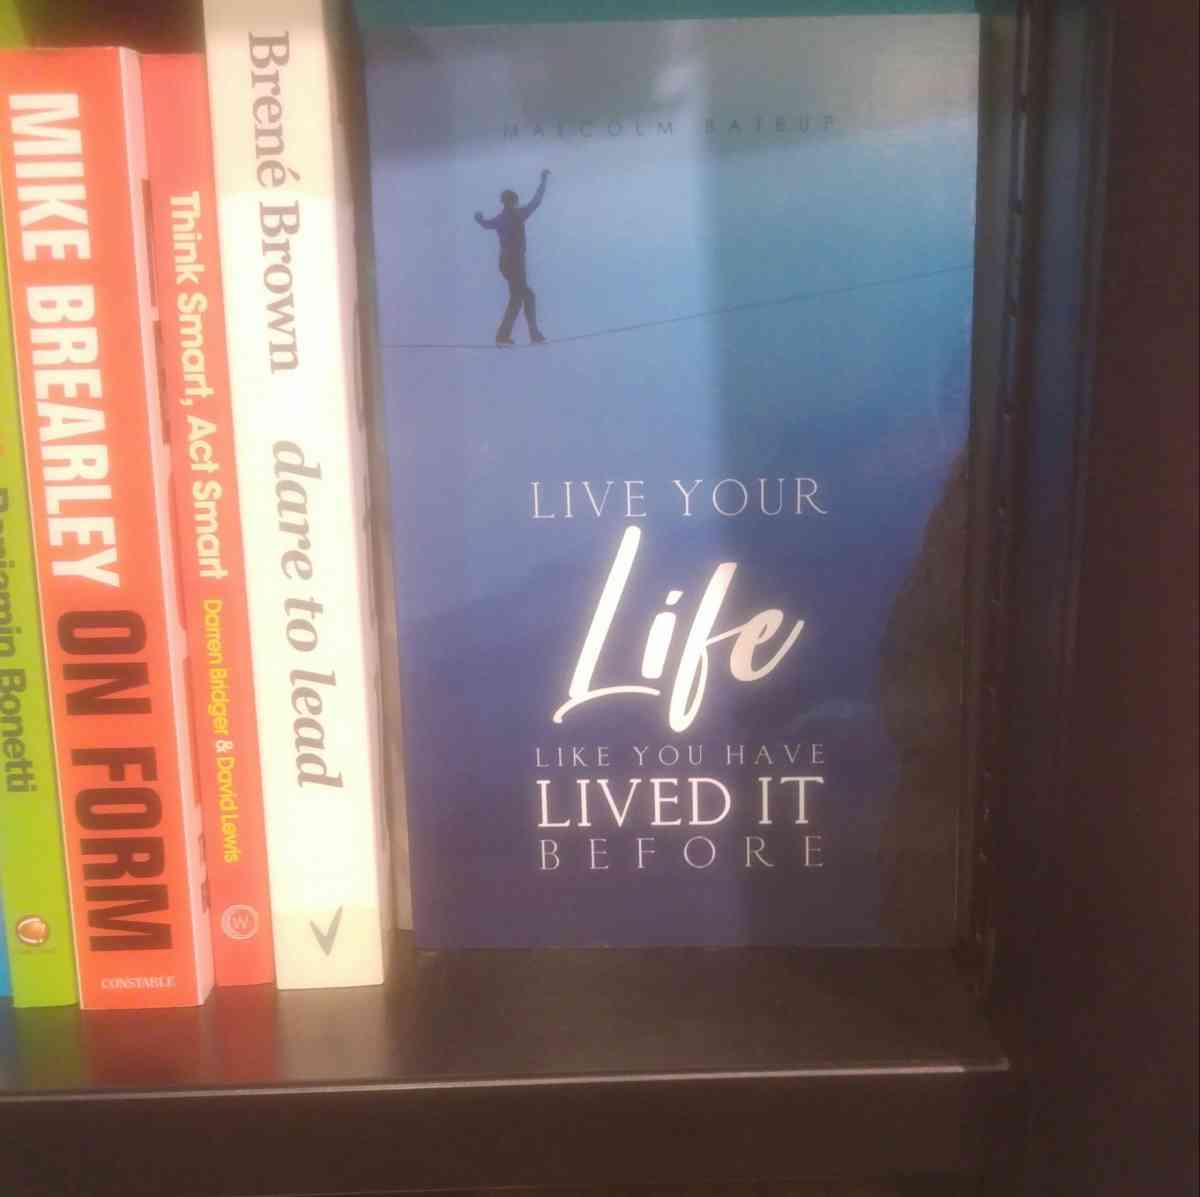 Malcolm-Bateup-Live-Your-Life-Like-You-Have-Lived-It-Before-Stocked-In-Waterstones-austin-macauley-publishers